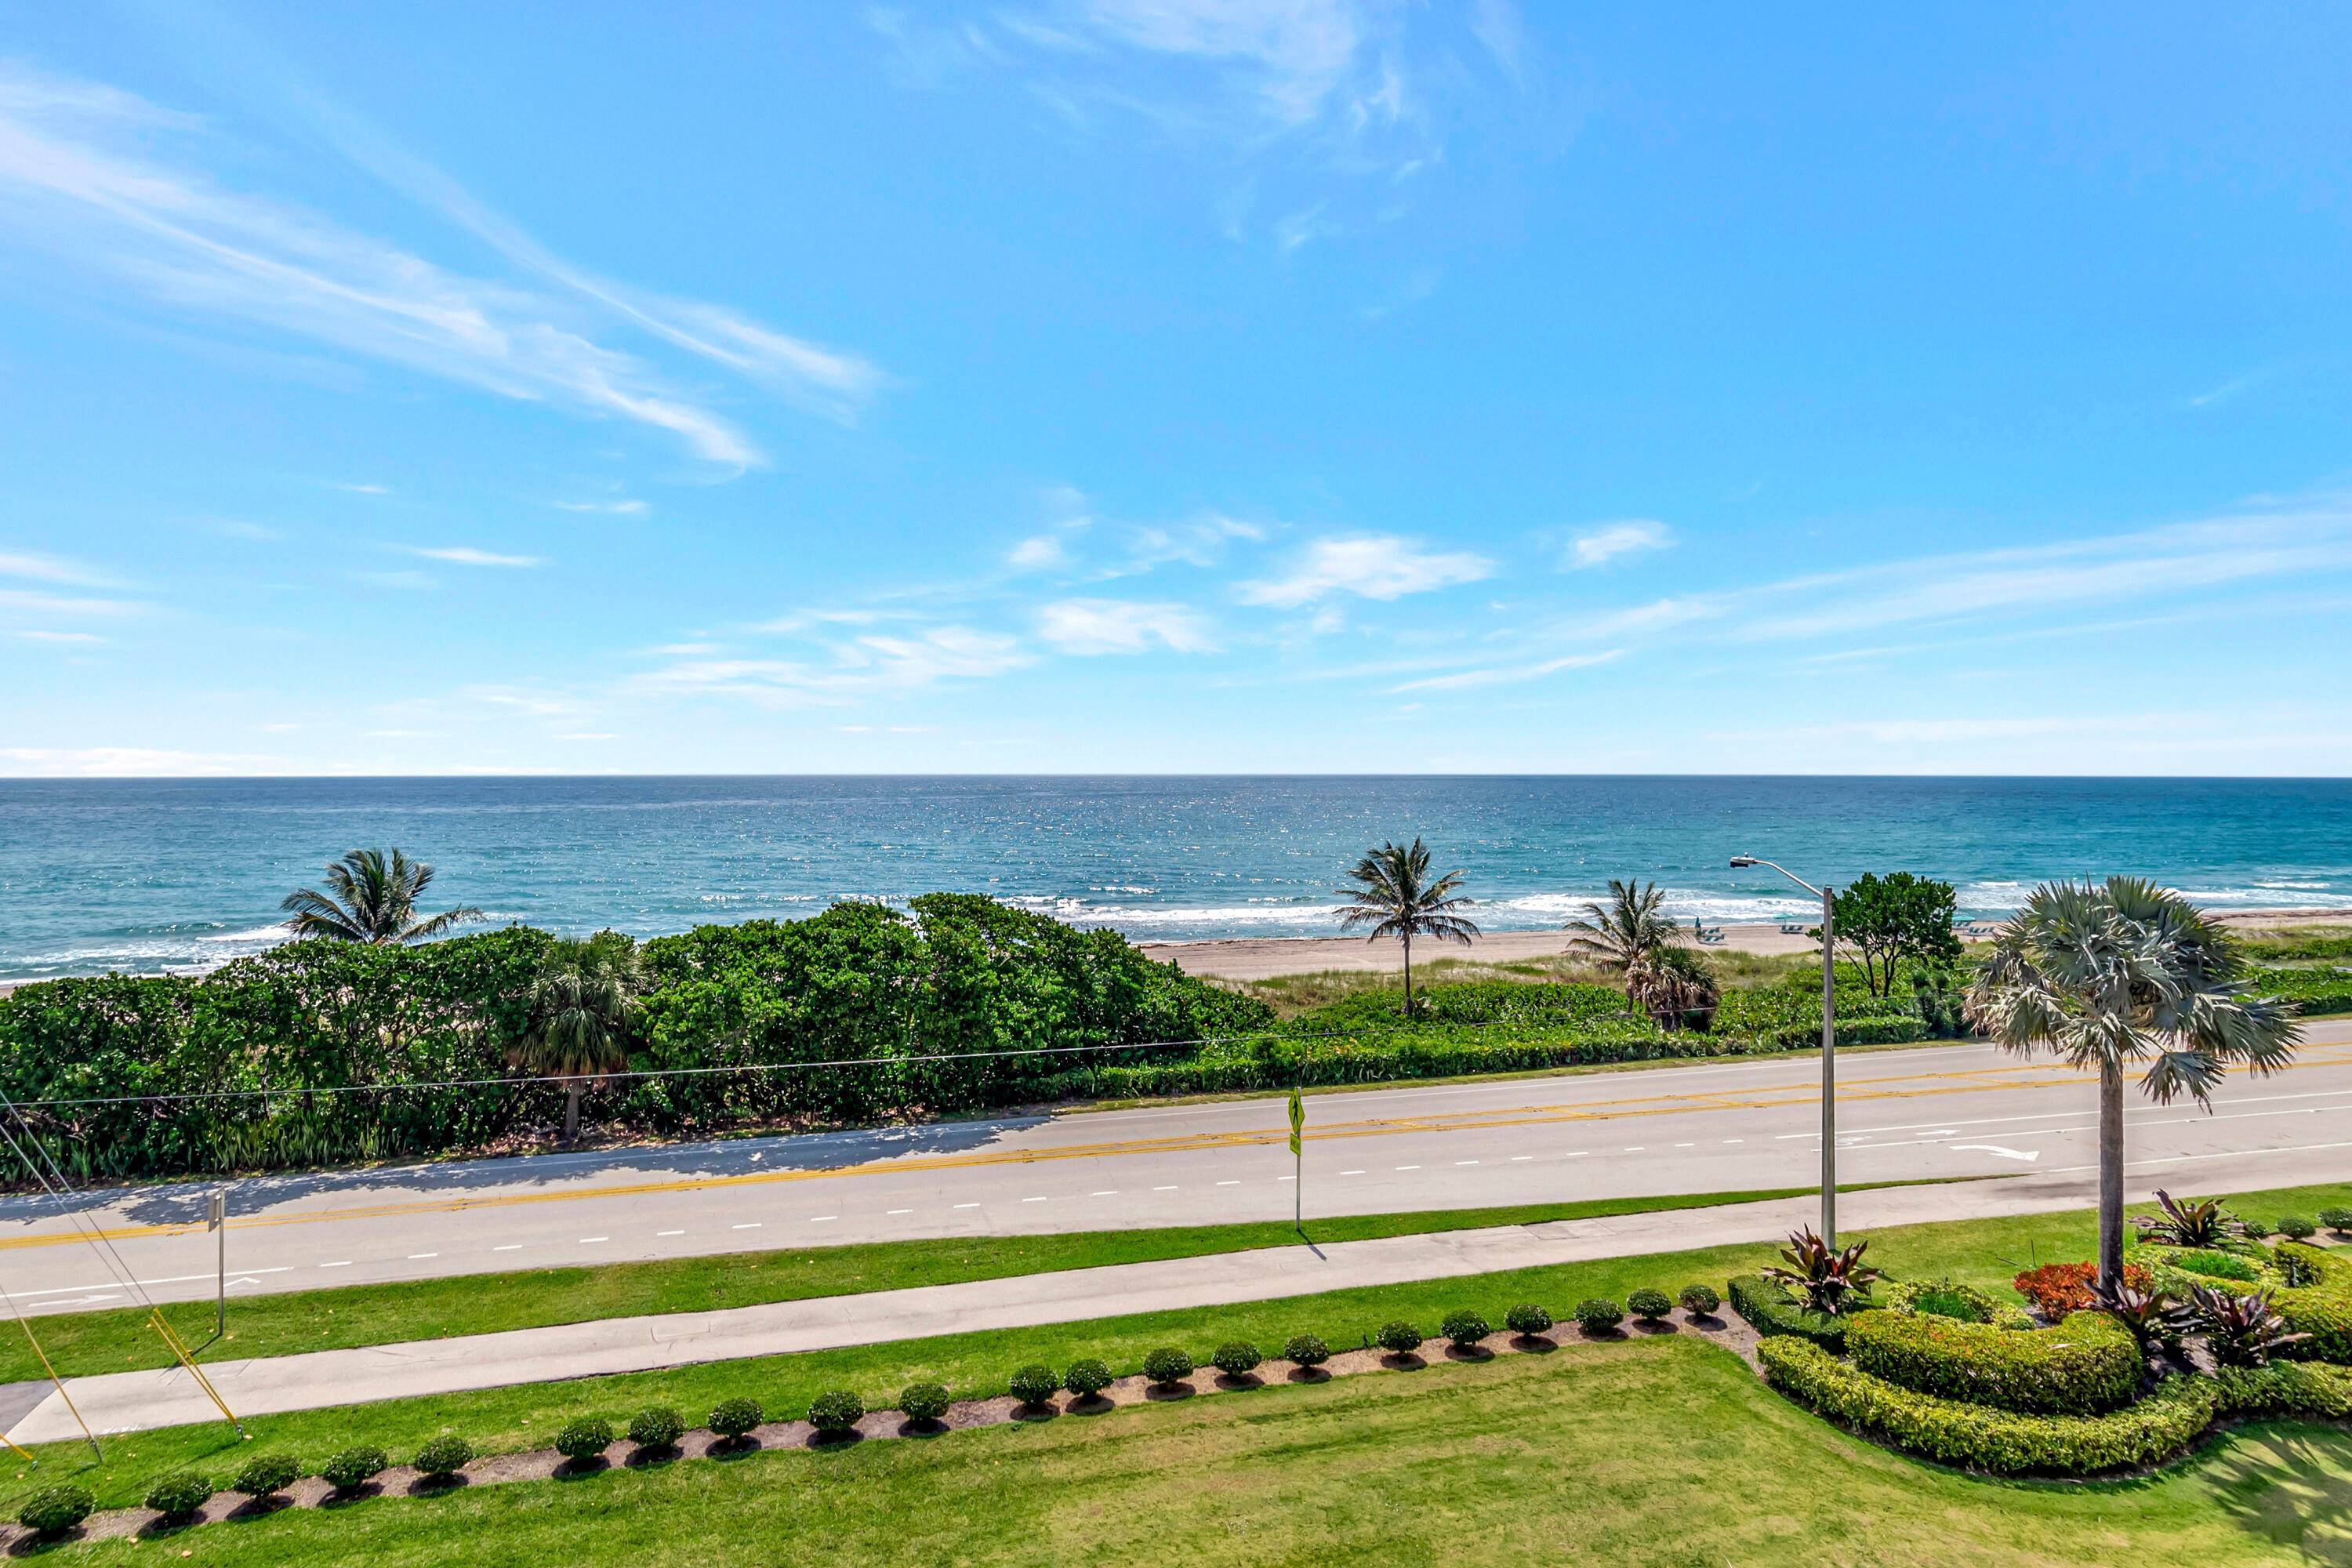 WAKE UP TO THE BEAUTIFUL PANORAMIC OCEAN VIEWS FROM THIS FURNISHED PENTHOUSE CONDO ON THE 5TH FLOOR 2 BEDROOM 2 BATH CORNER CONDO WITH 1, 388 SQ.